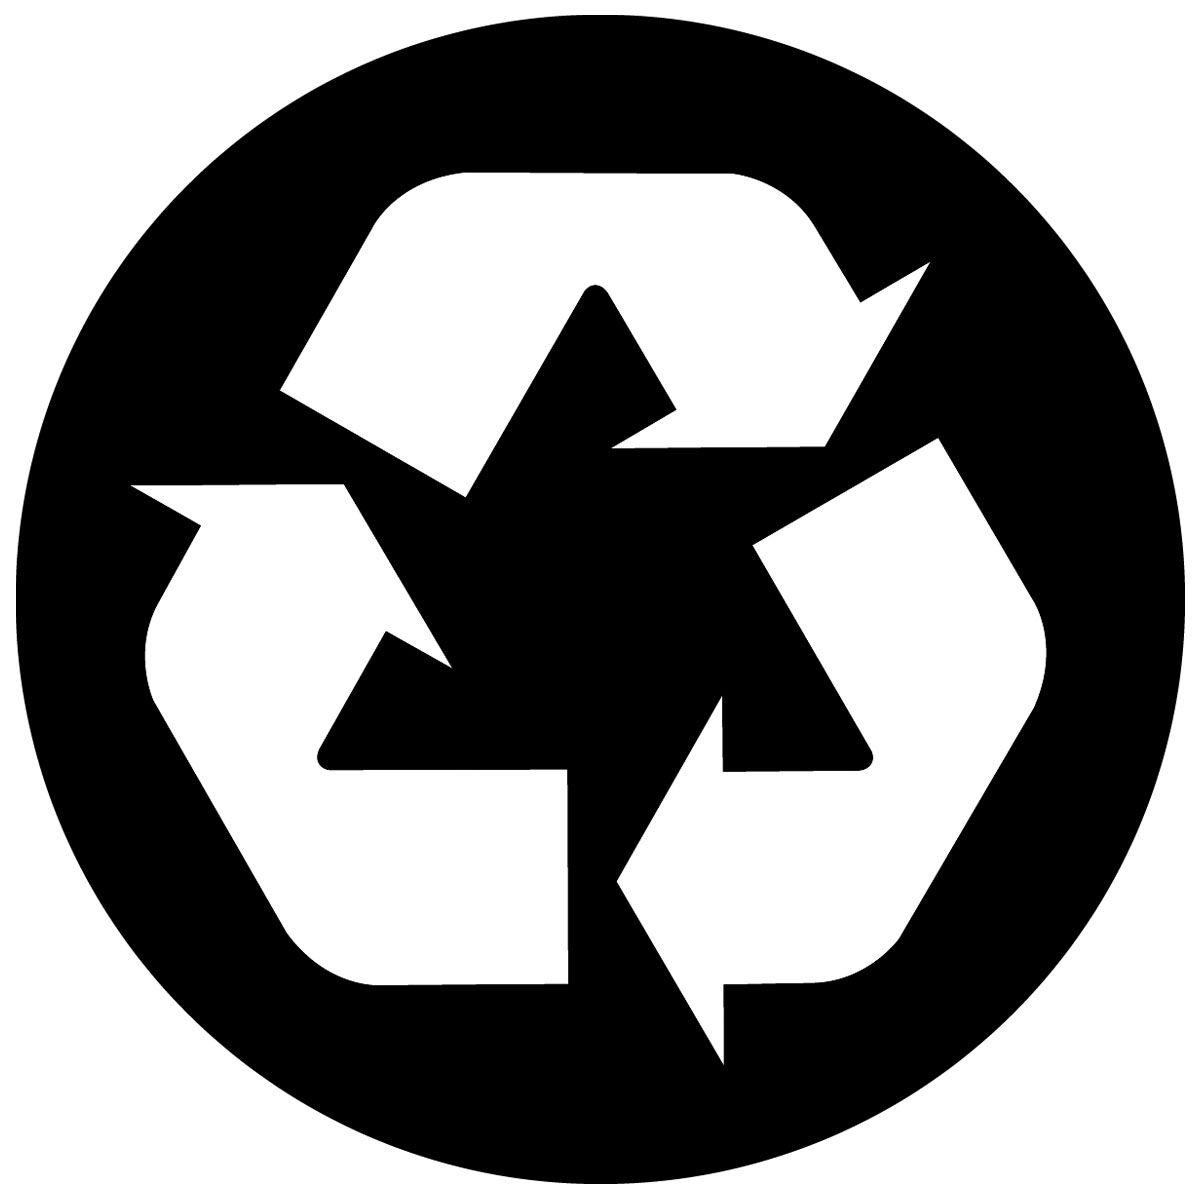 White Recycle Logo - Recycle Symbol Pictures - Cliparts.co